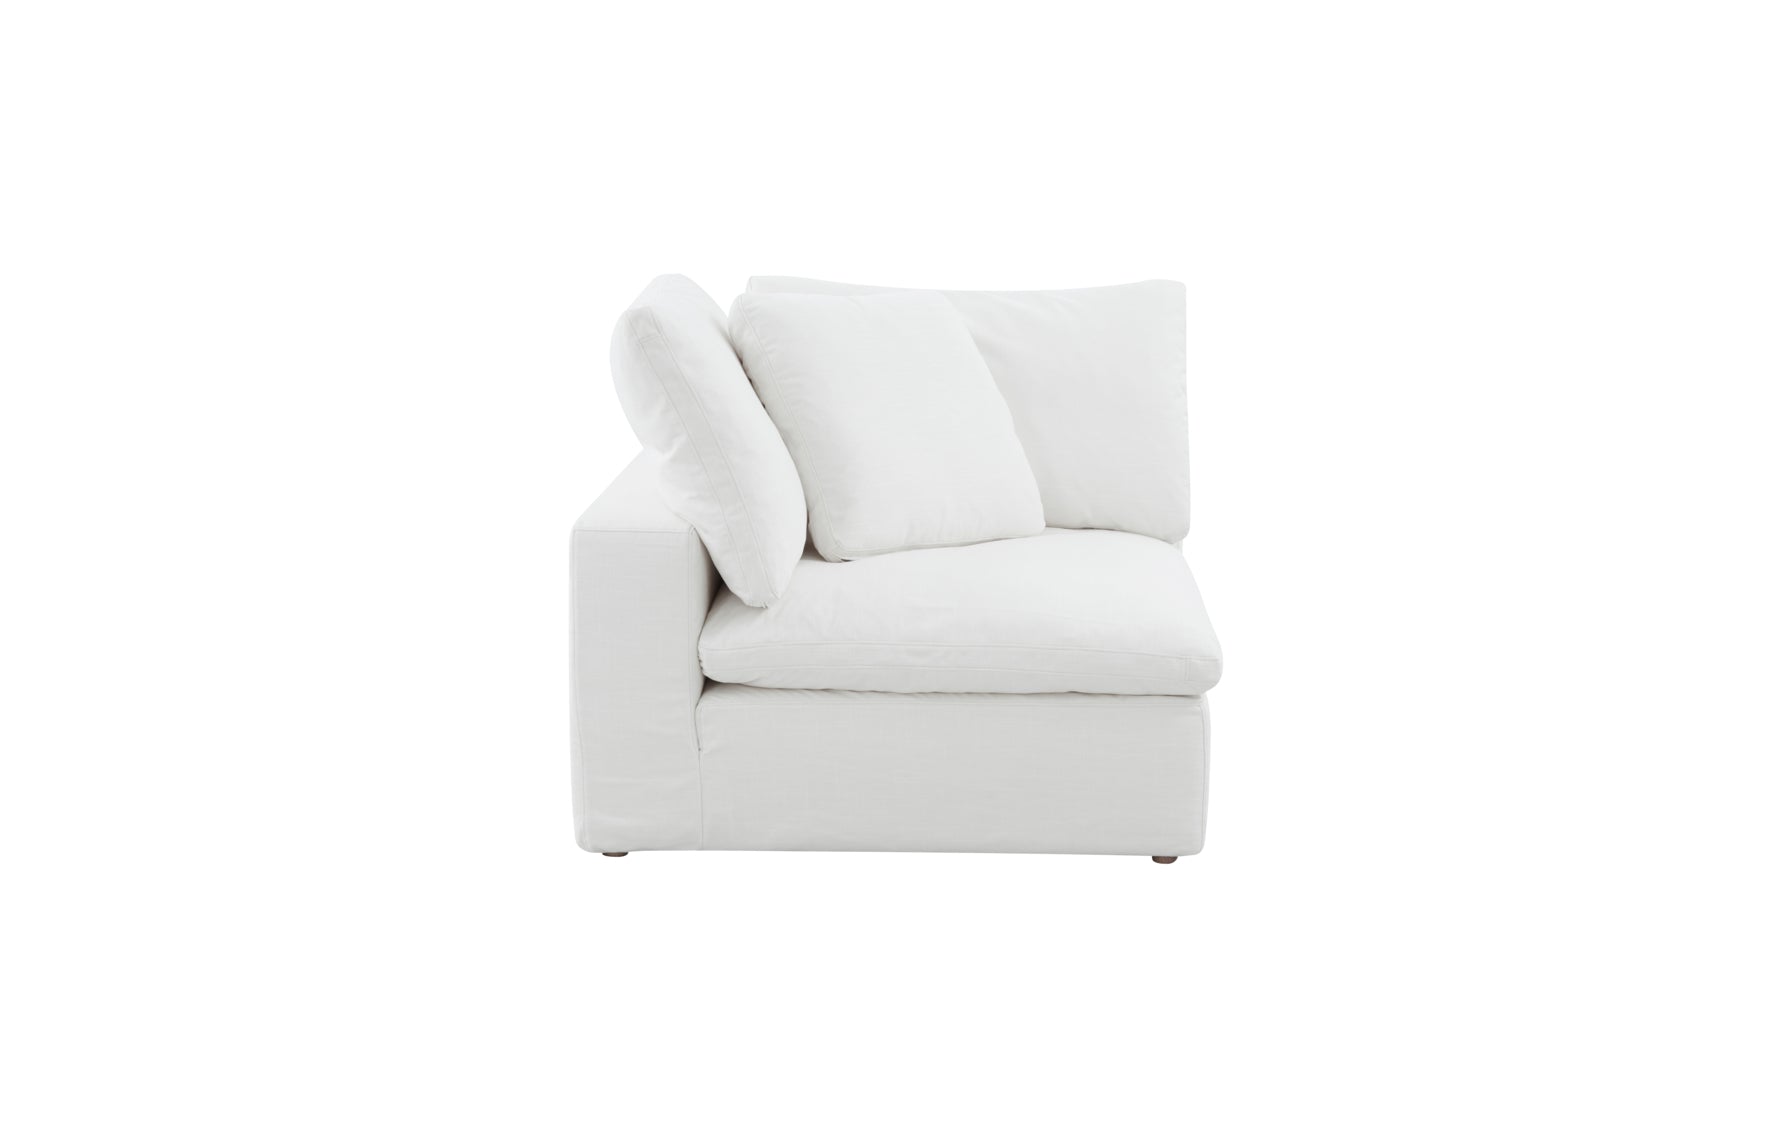 Slipcover - Movie Night™ Corner Chair, Large, Brie (Left or Right) - Image 1